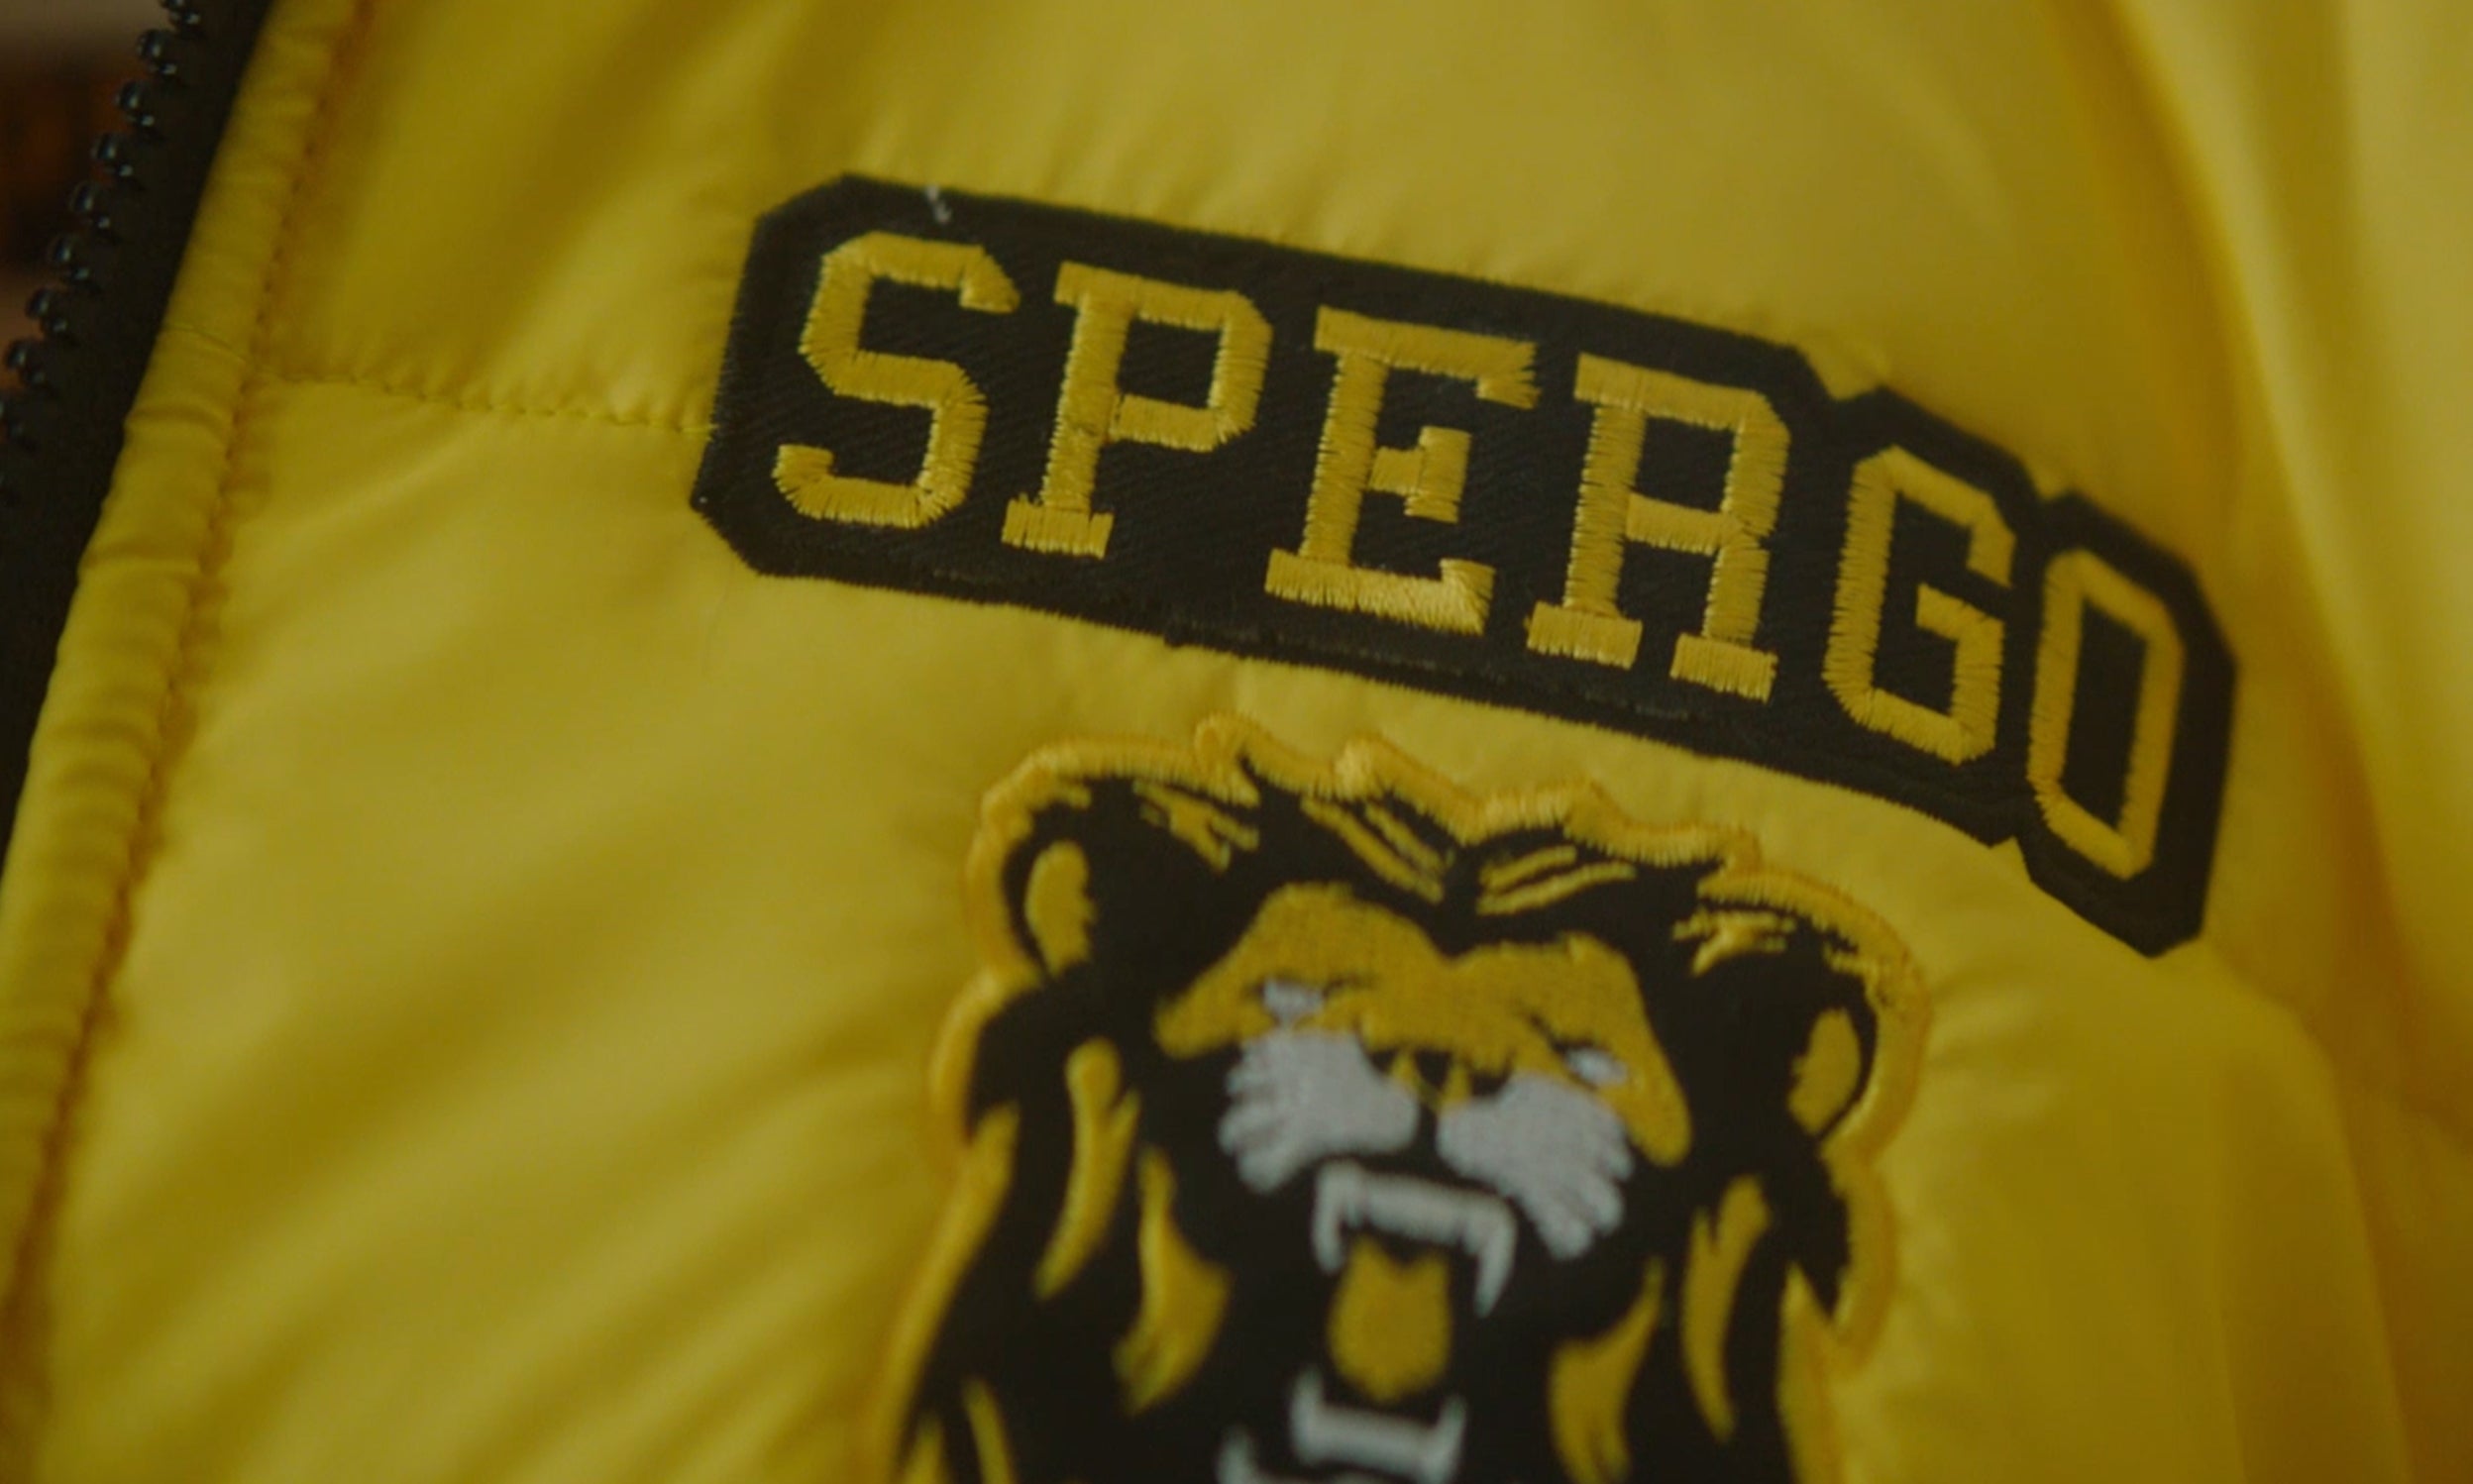 Spergo logo on yellow jacket. Spergo is a company featured in Invesco QQQ's Innovation Now series.